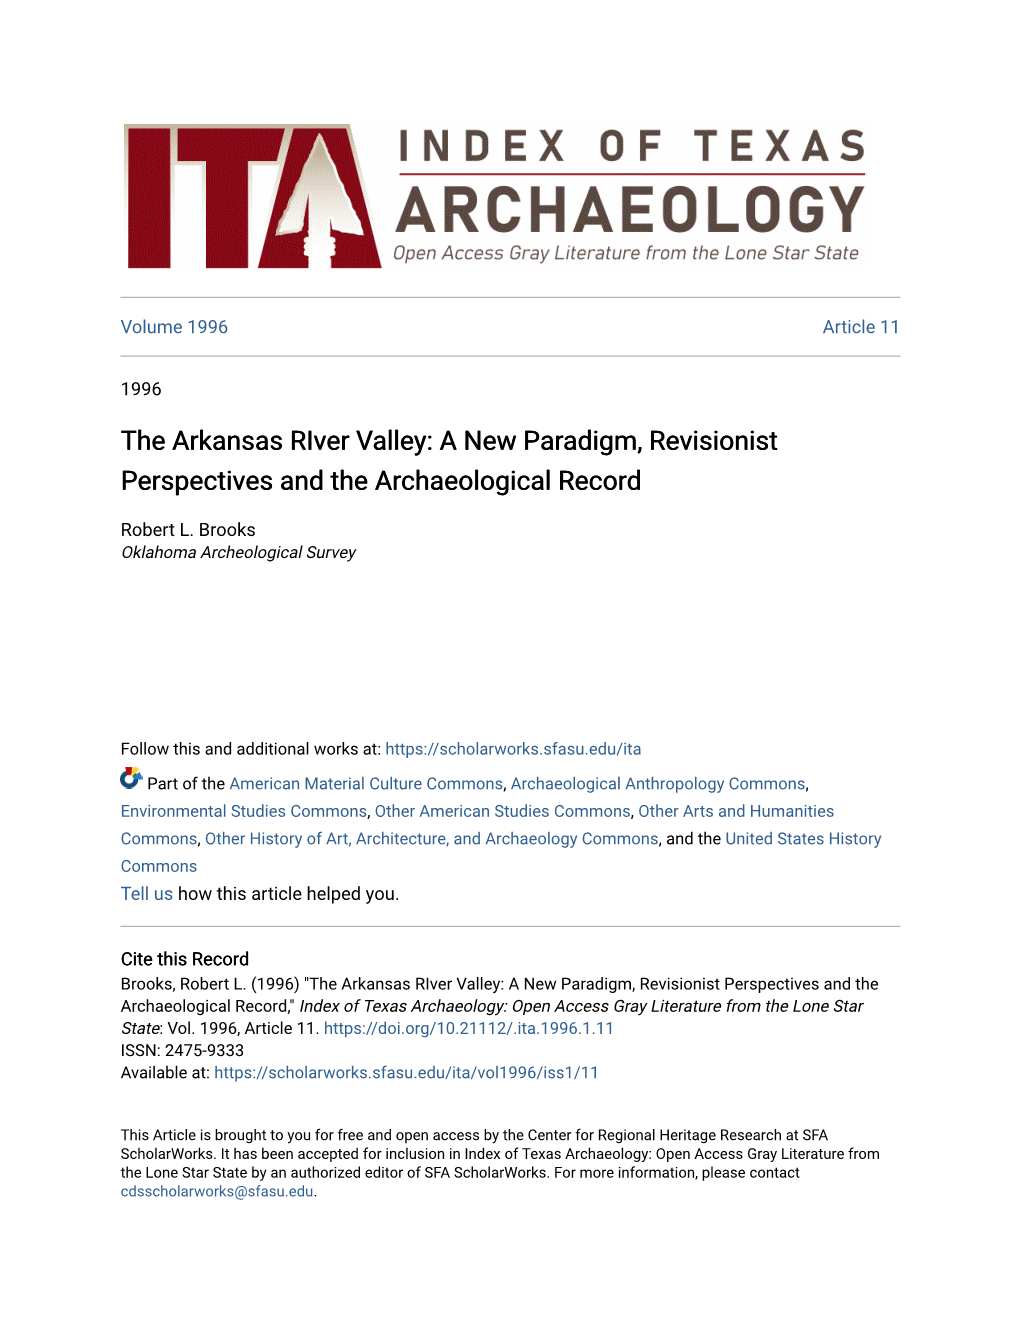 The Arkansas River Valley: a New Paradigm, Revisionist Perspectives and the Archaeological Record